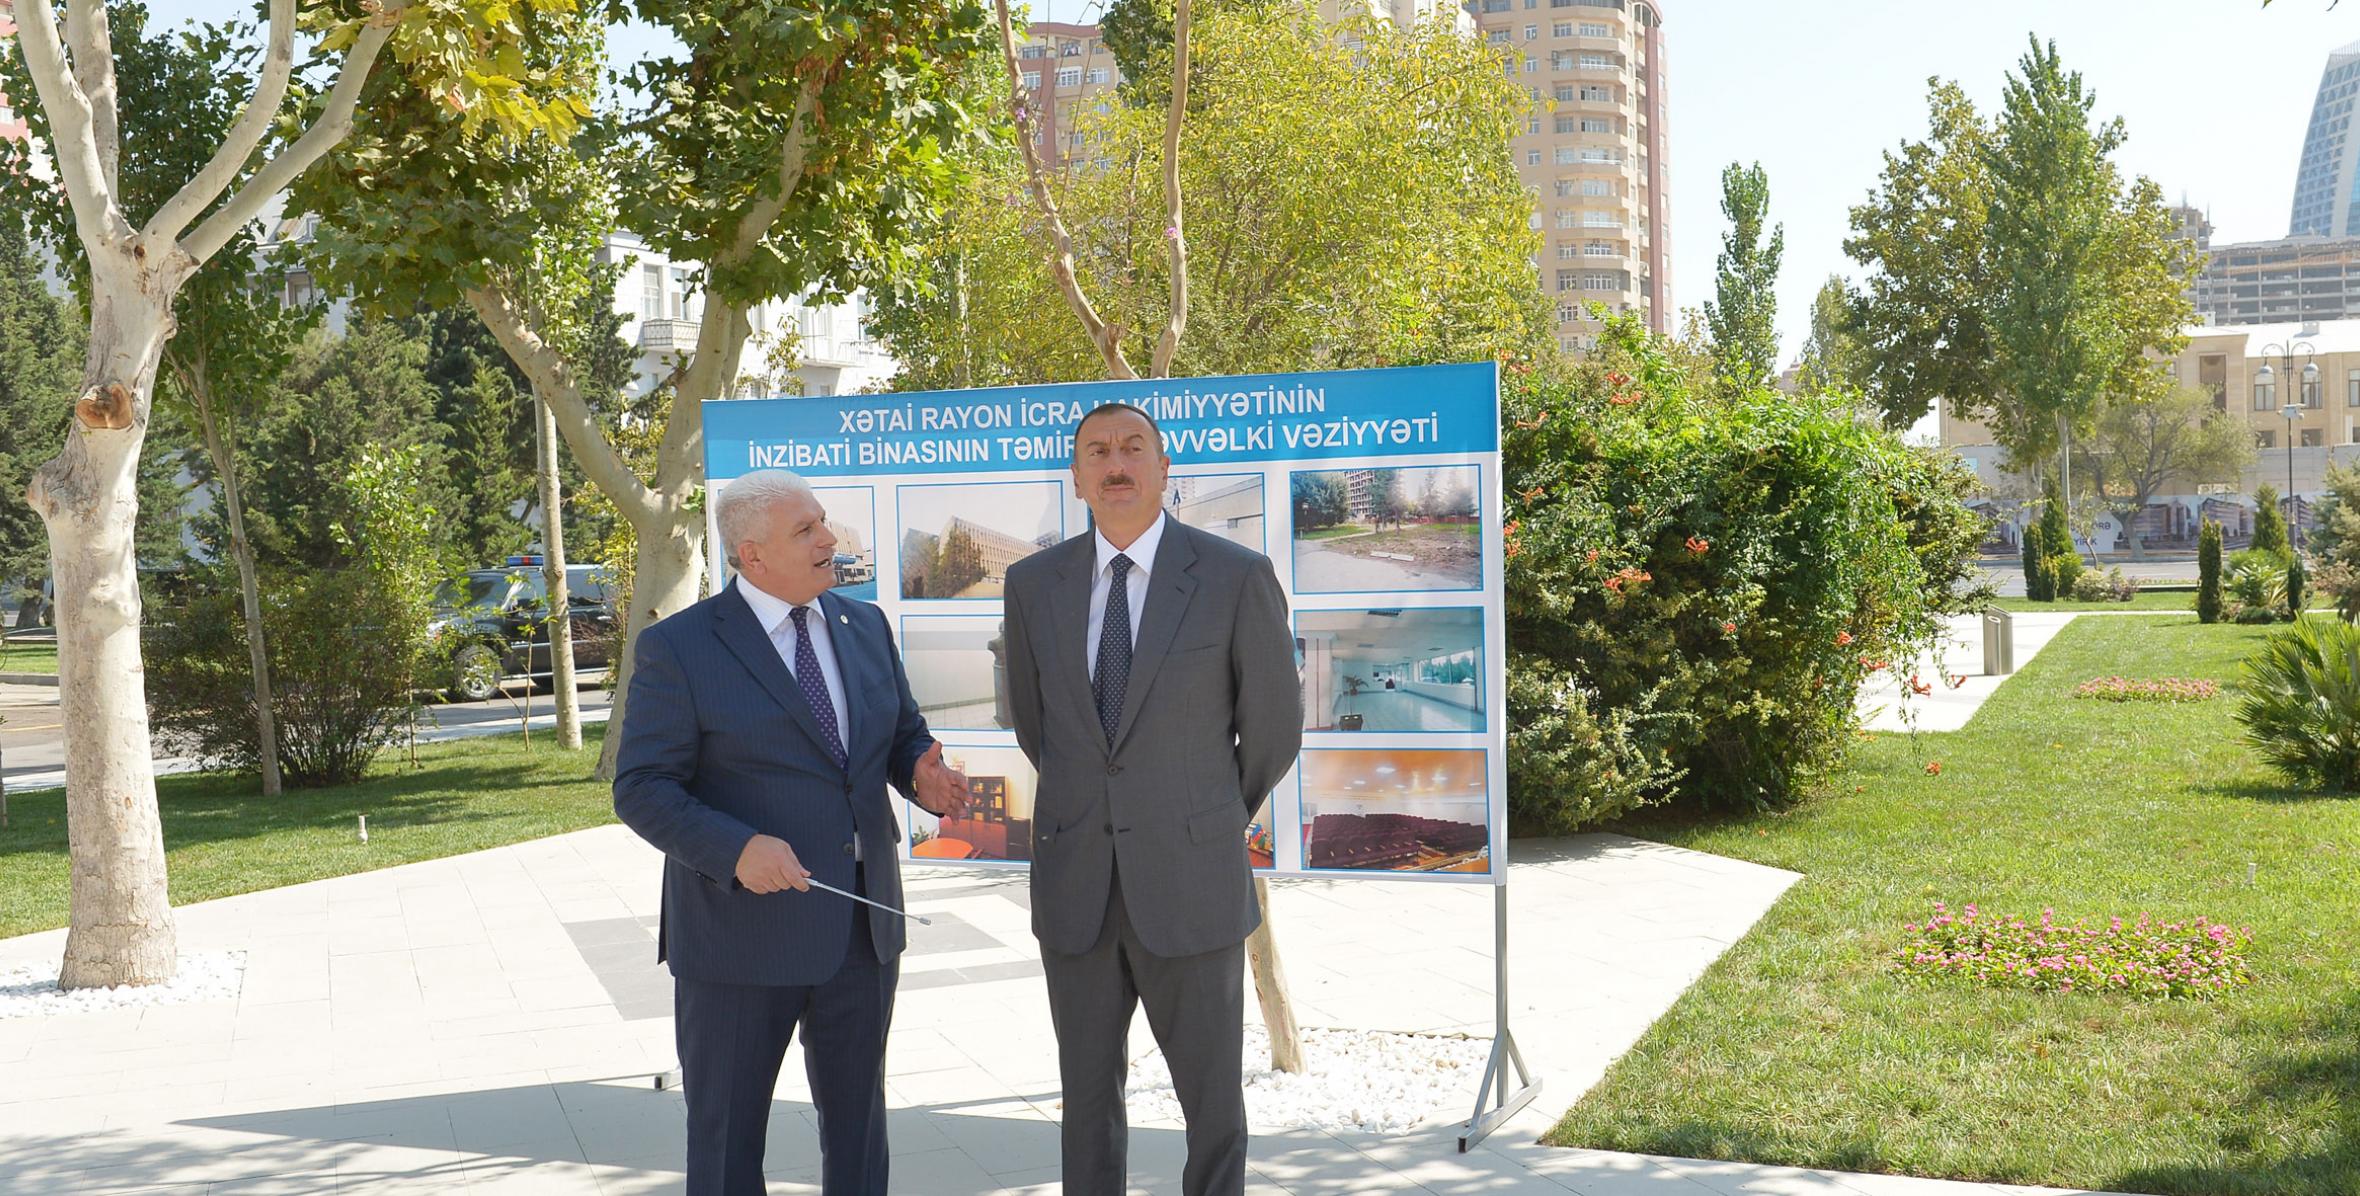 Ilham Aliyev reviewed reconstruction work at the office building of the Khatai District Executive Authority in Baku